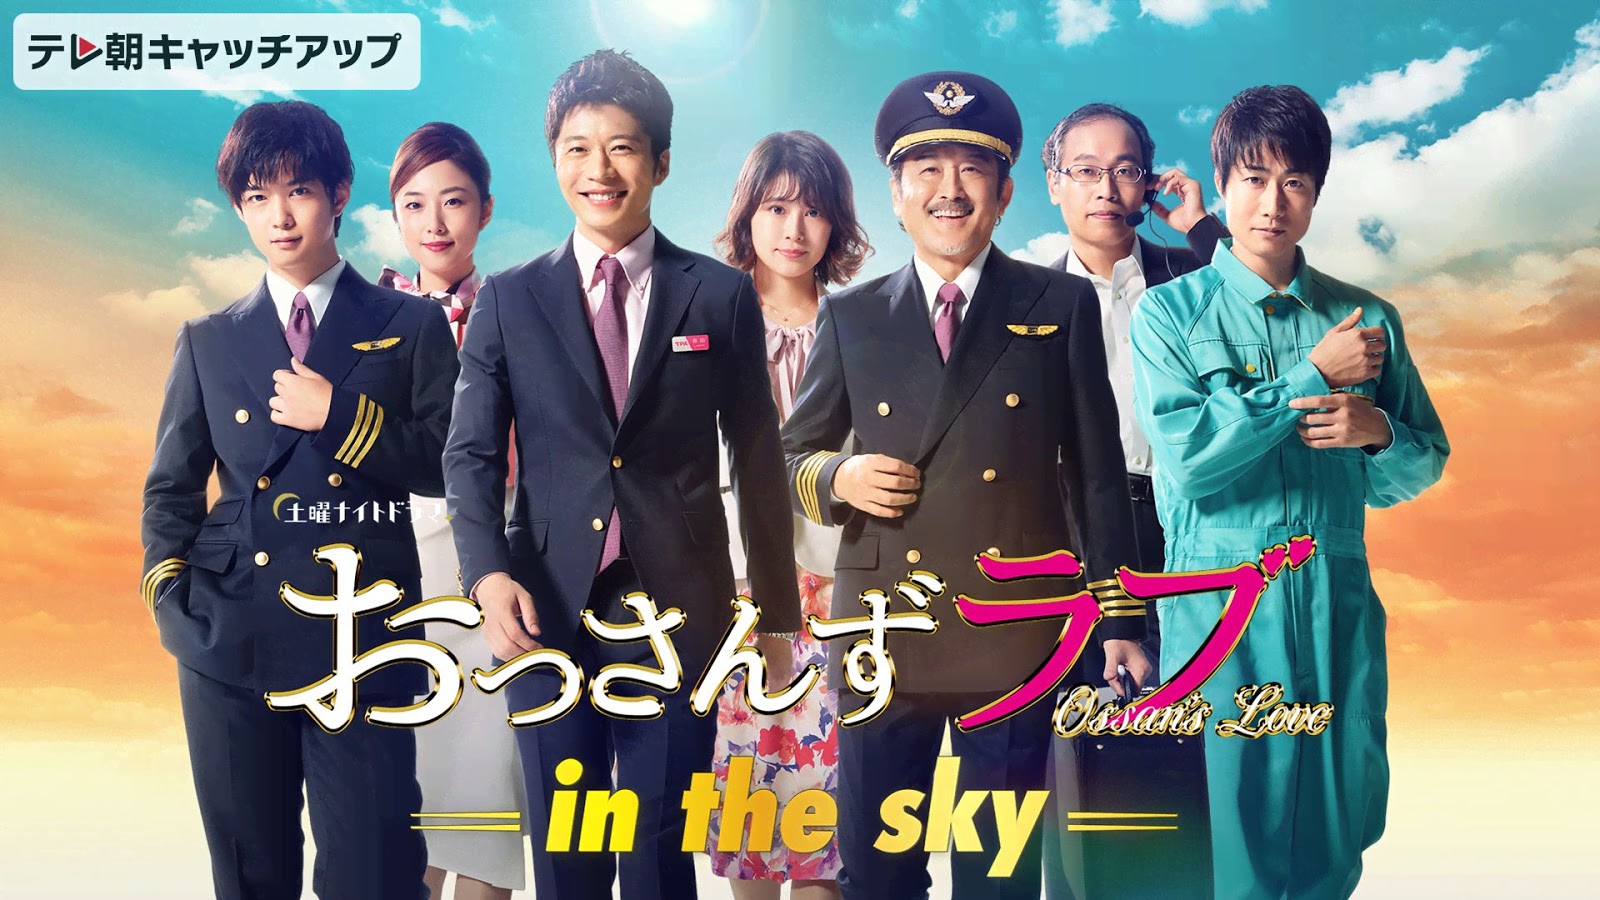 Ossan S Love In The Sky Sub Espanol Psycho801